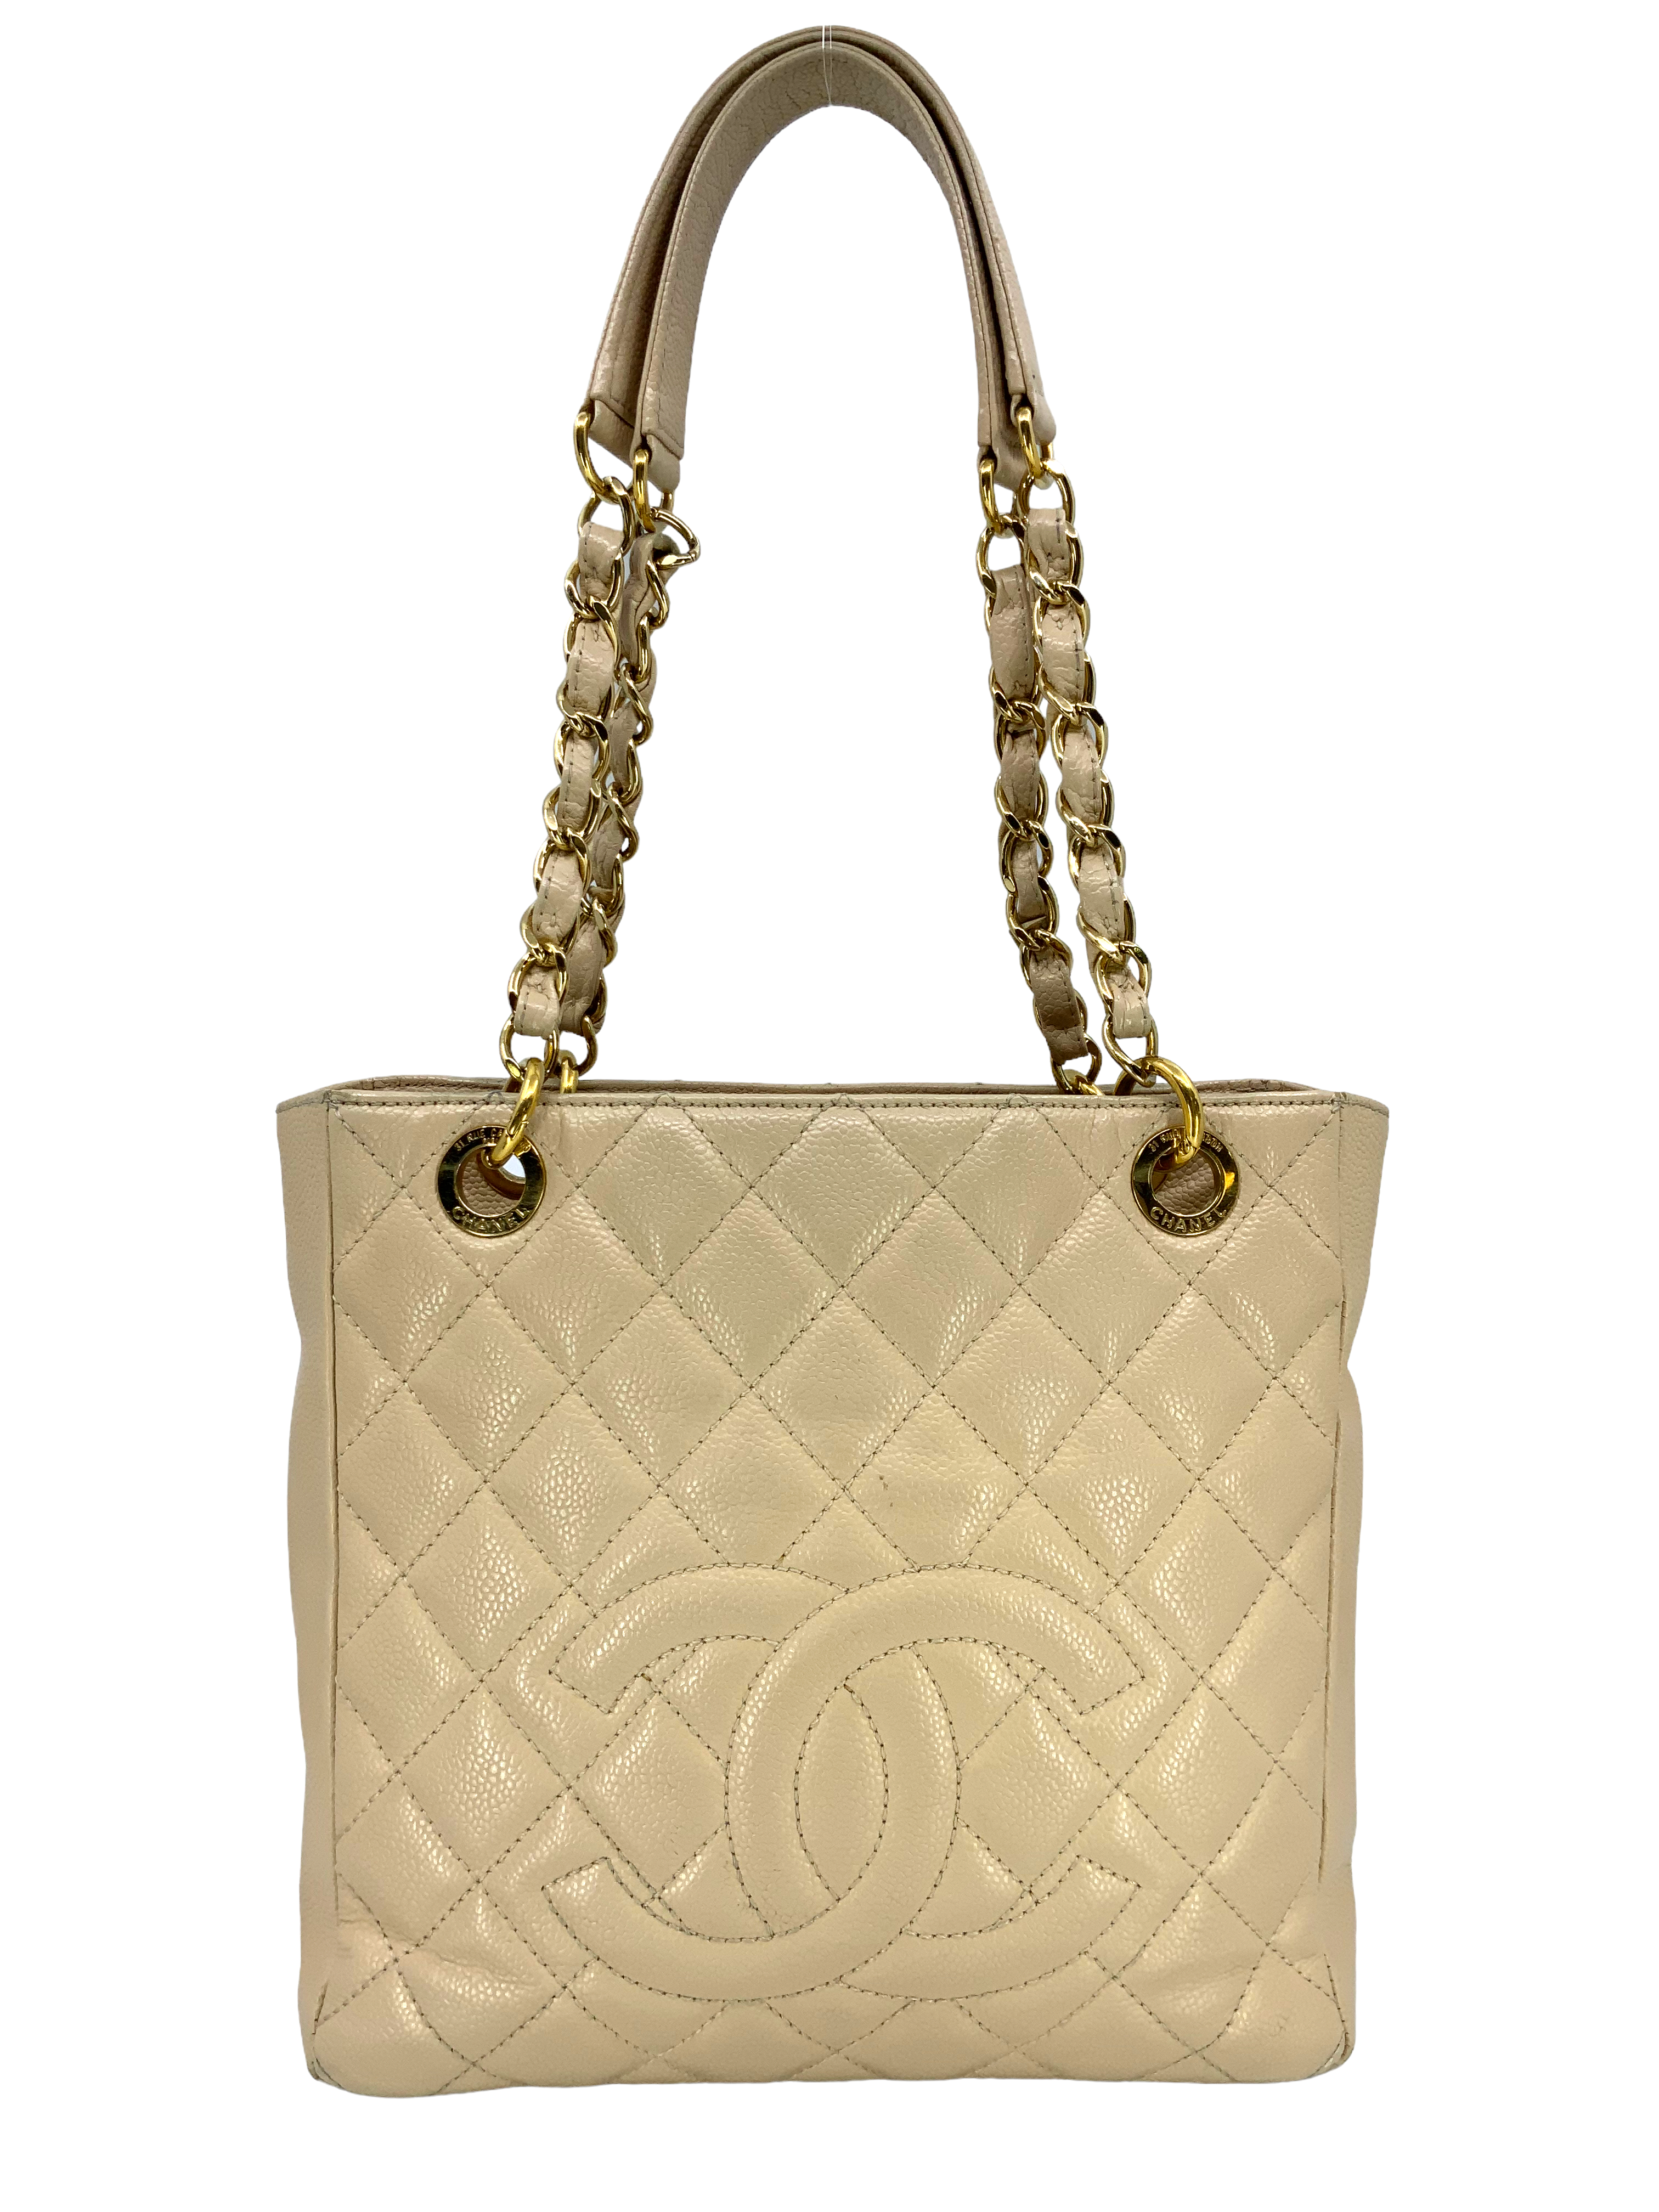 CHANEL PETITE SHOPPING TOTE BAG IN BEIGE CAVIAR LEATHER - Still in